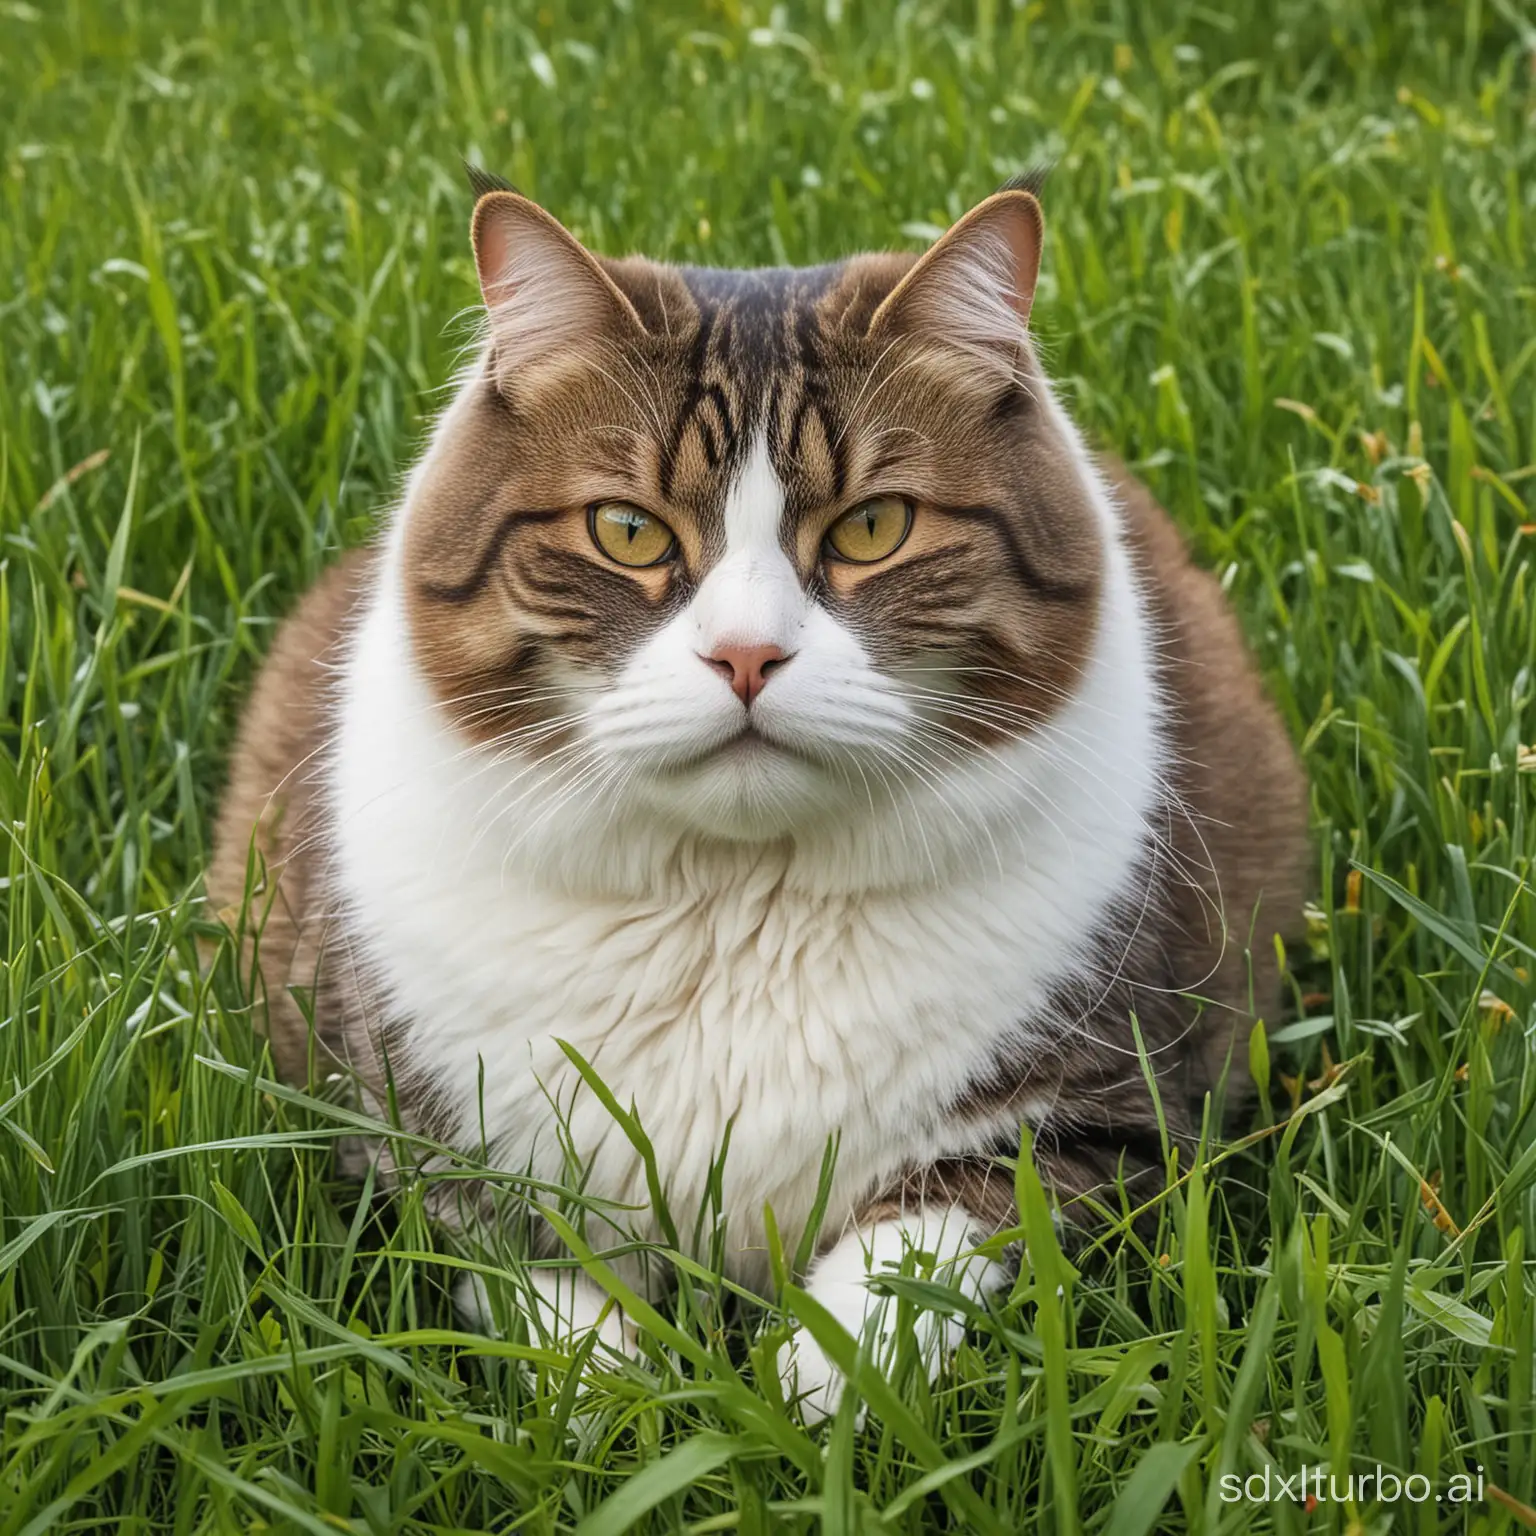 The fat cat in the grass